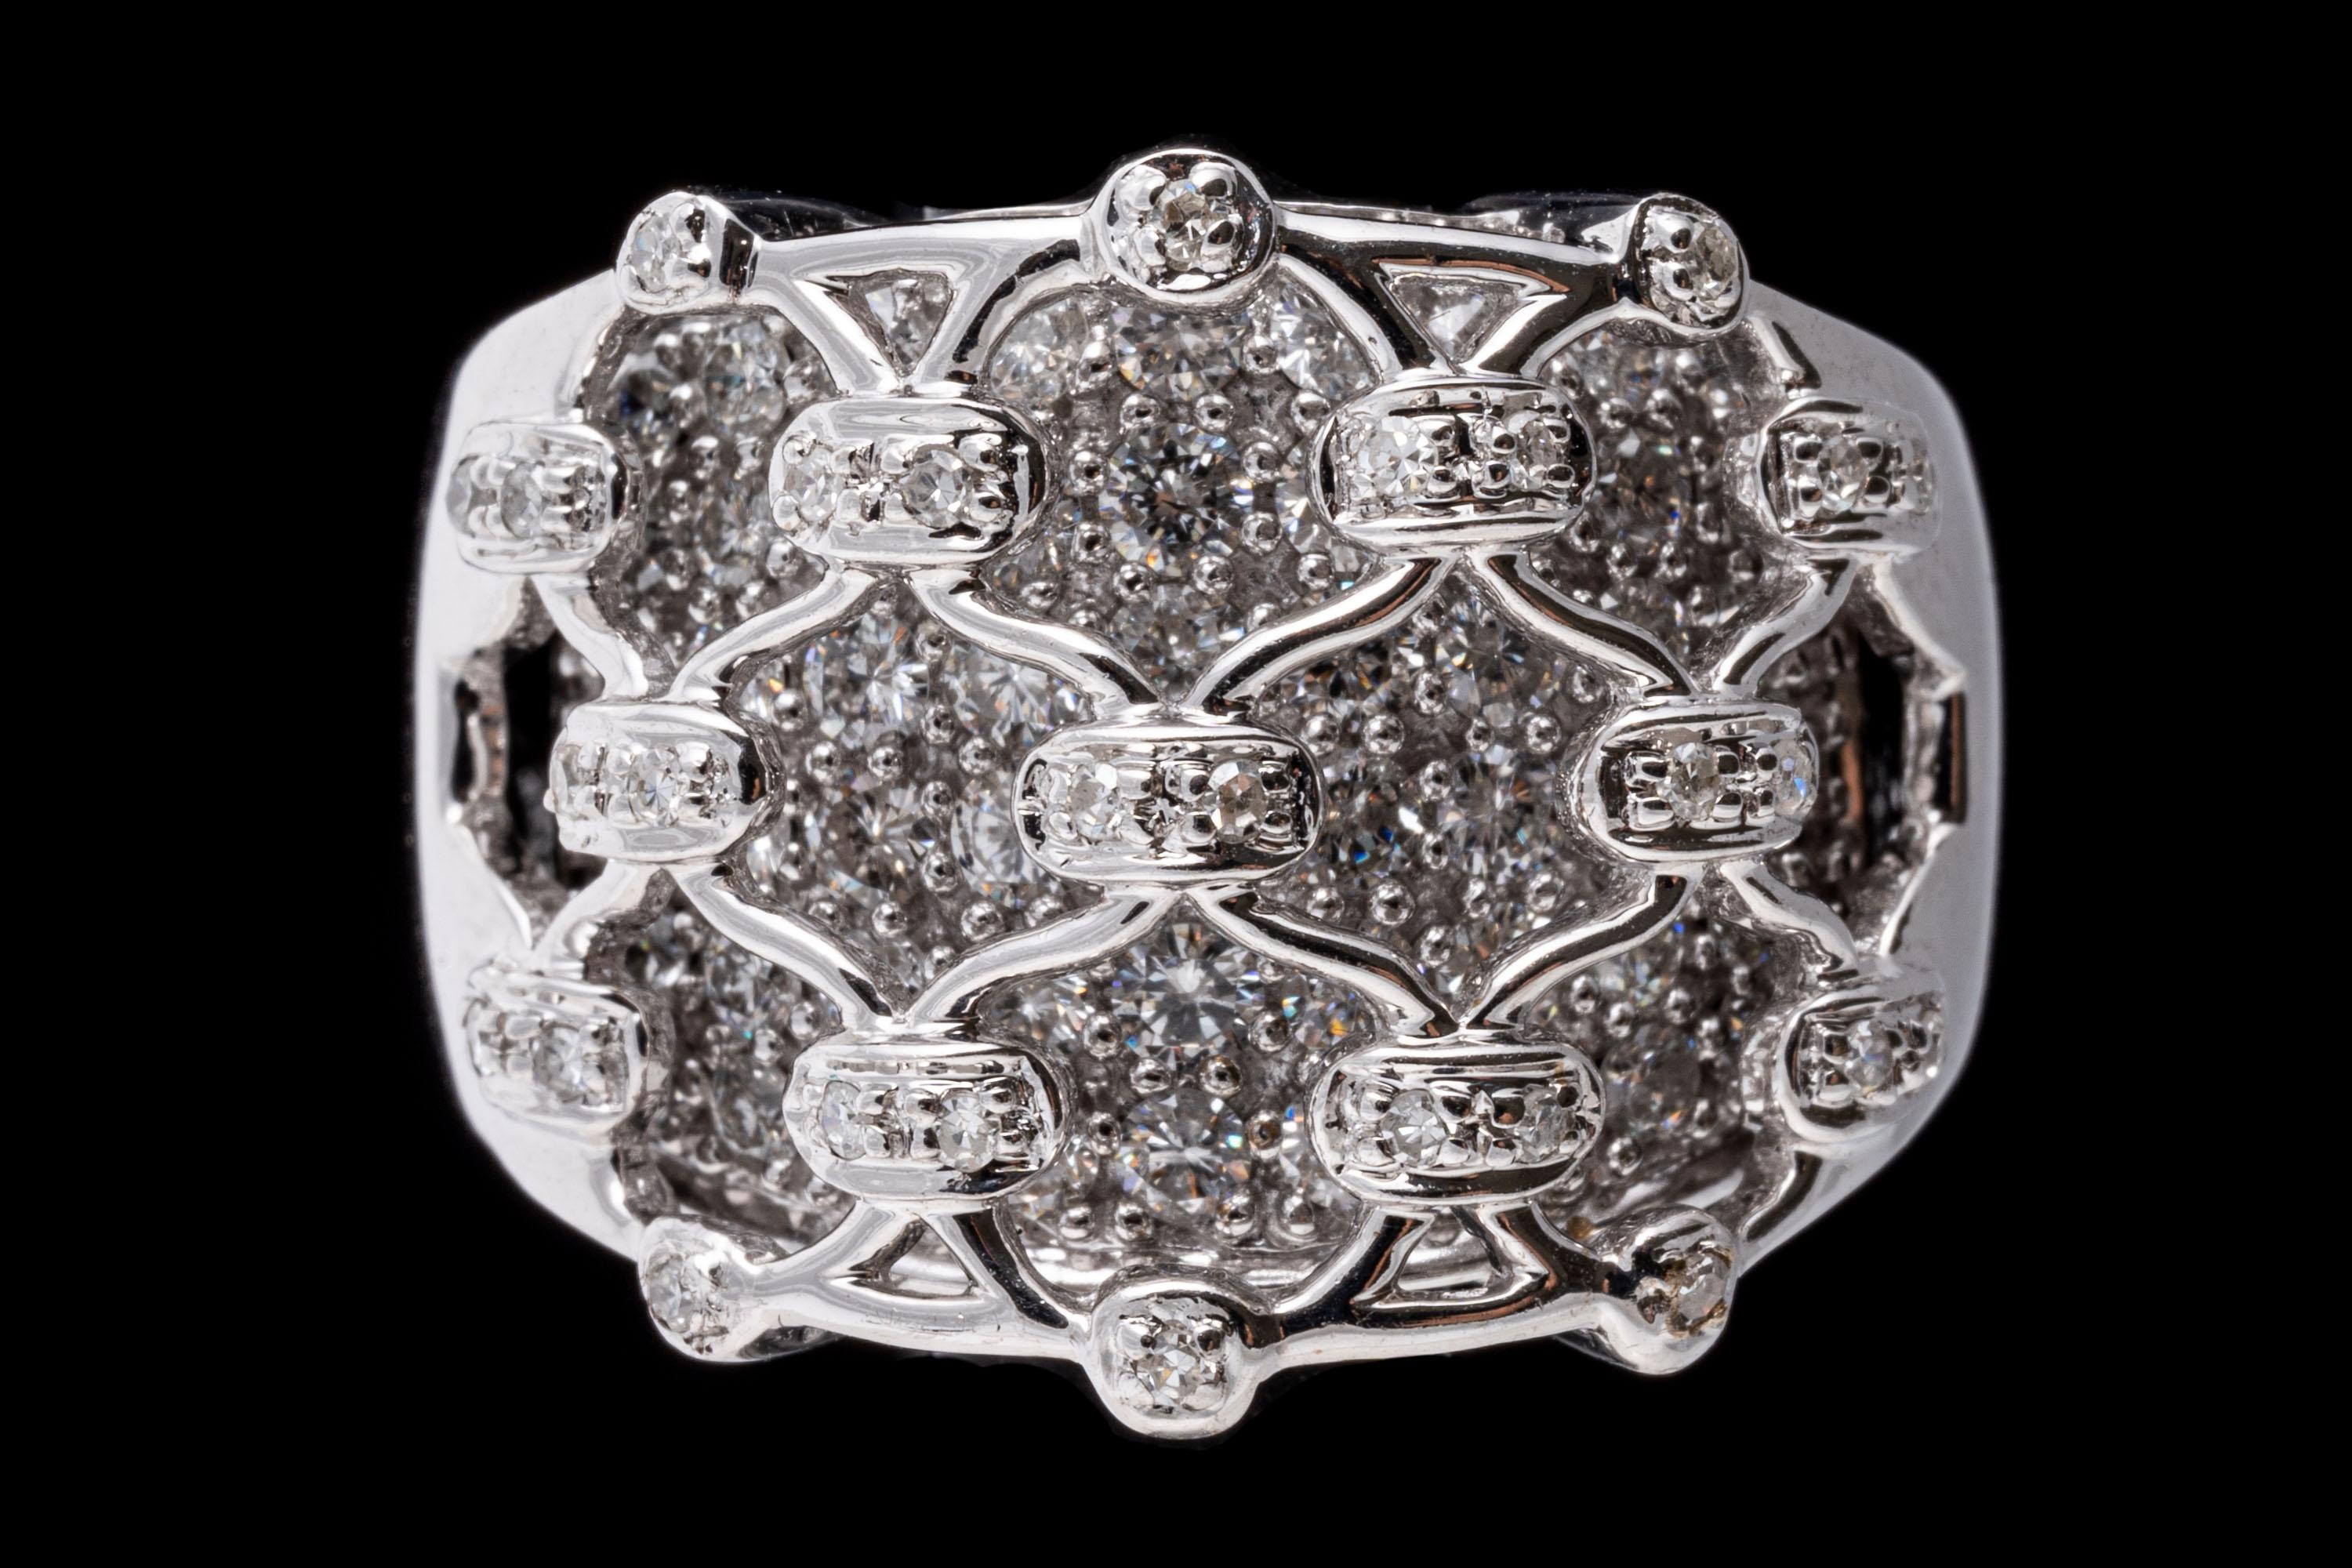 18K white gold ring. This stunning and brilliant ultra wide ring has a lace netting motif top, set with round faceted diamonds, which overlays a background of round brilliant cut diamonds for a total diamond weight of approximately 1.25 TCW.  The